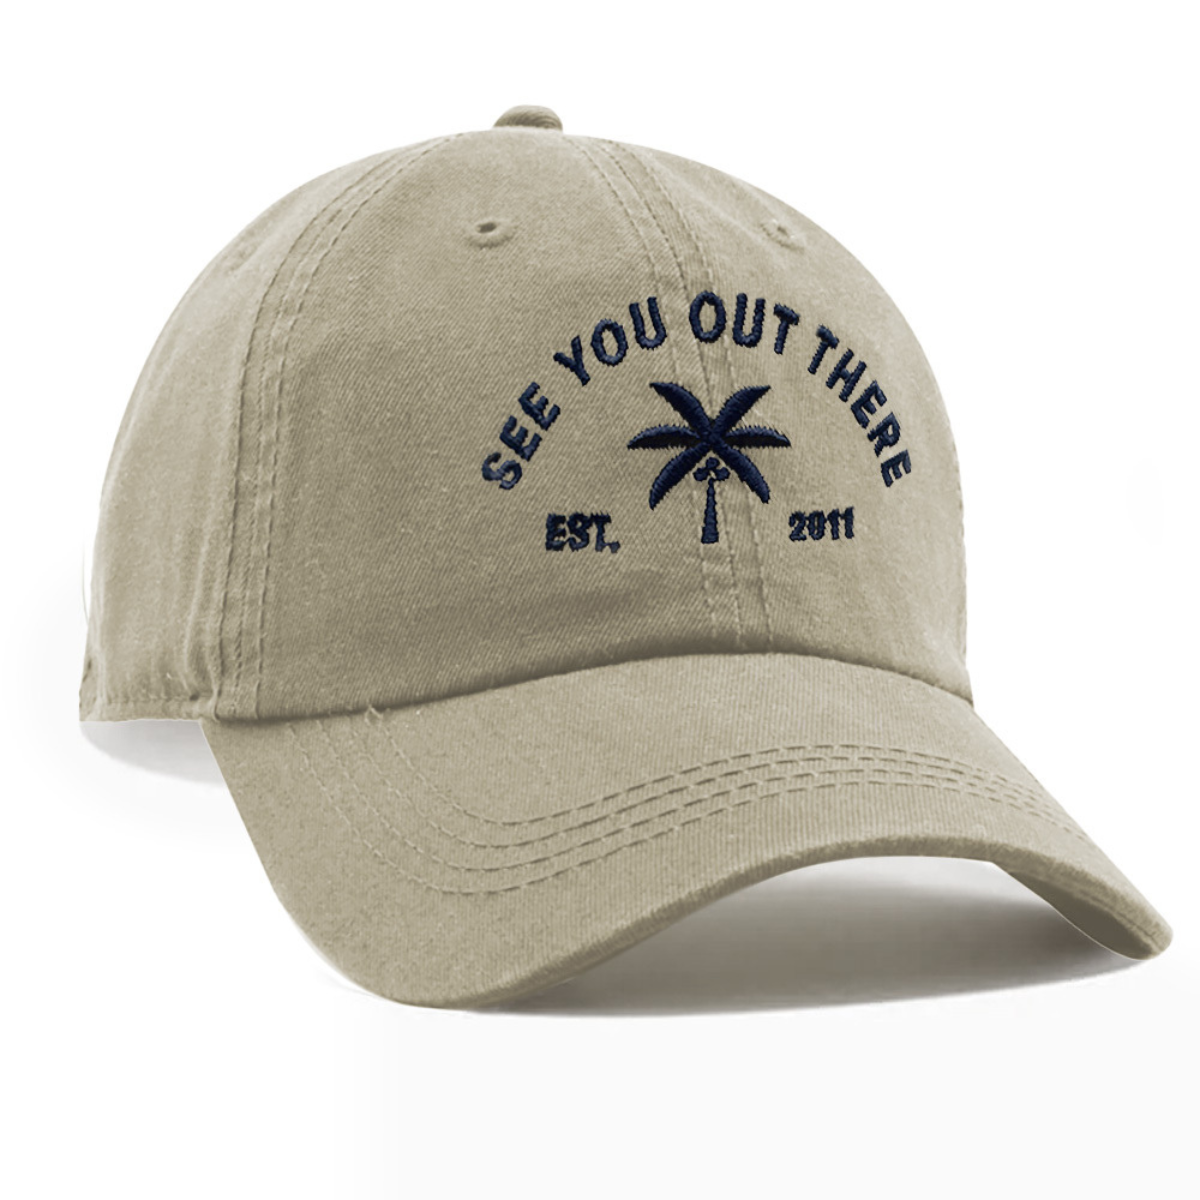 See You Out There Hat - Side